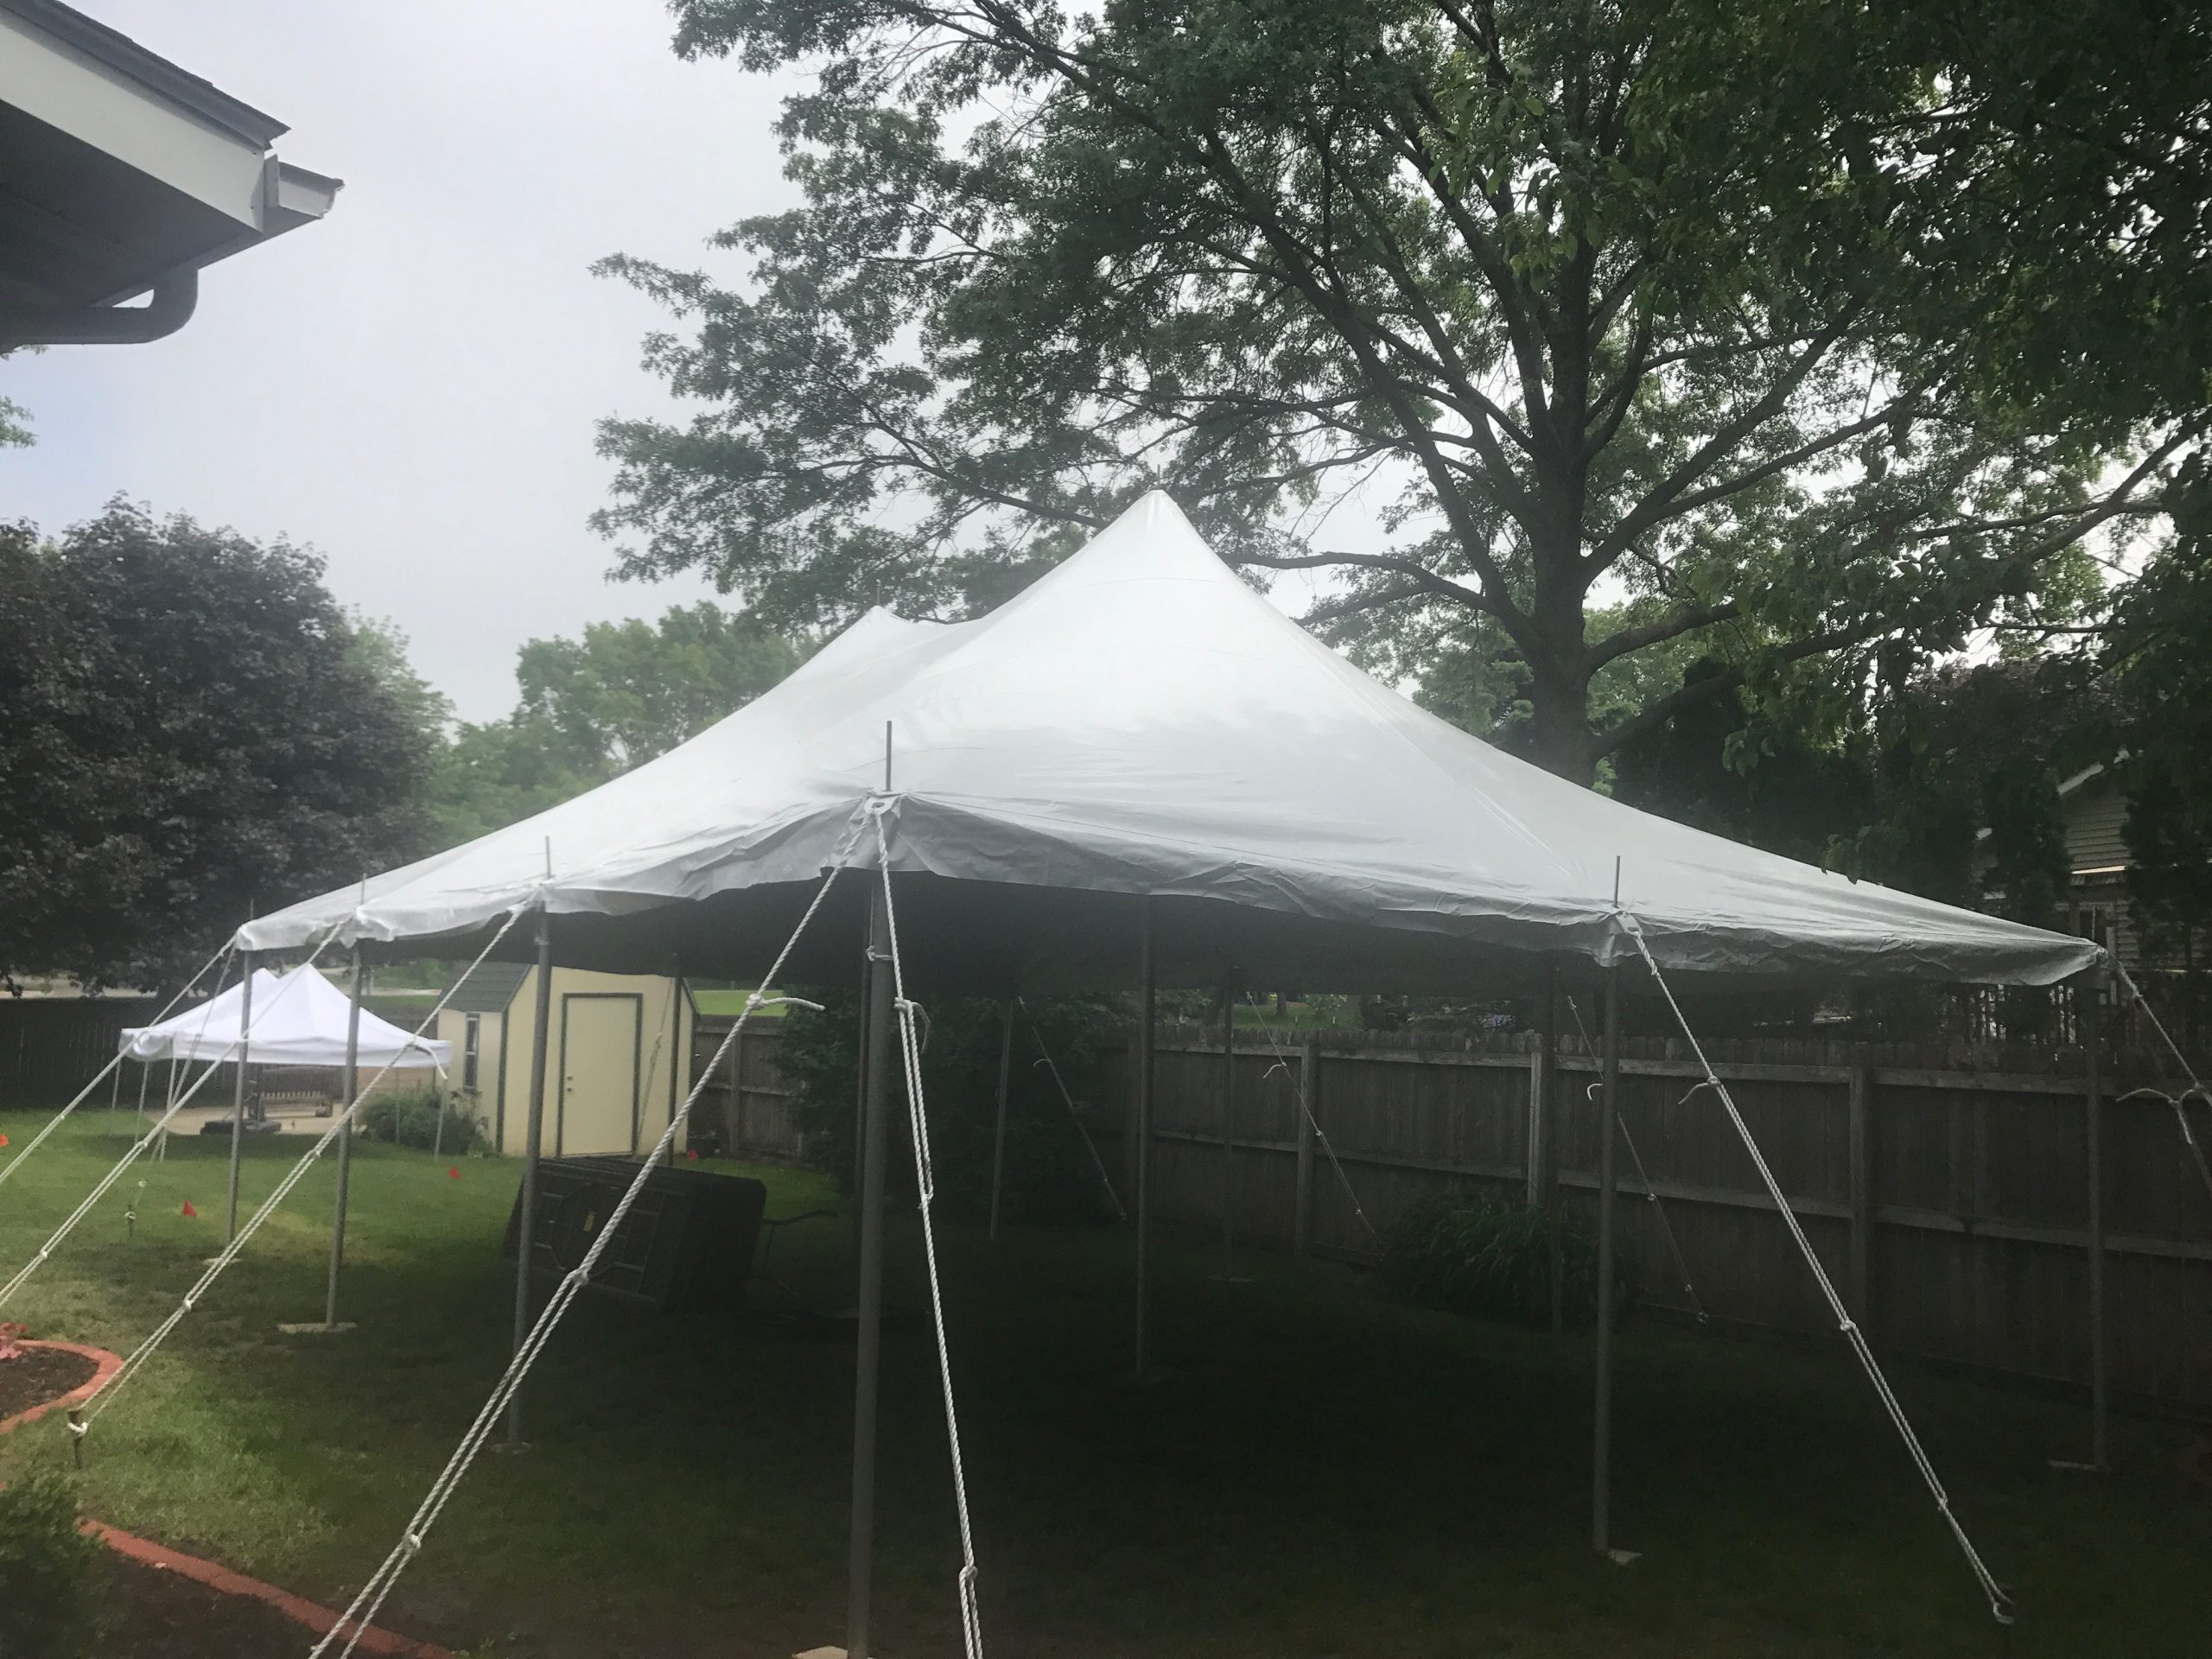 Close fit with this 20' x 30' rope and pole tent in Iowa City